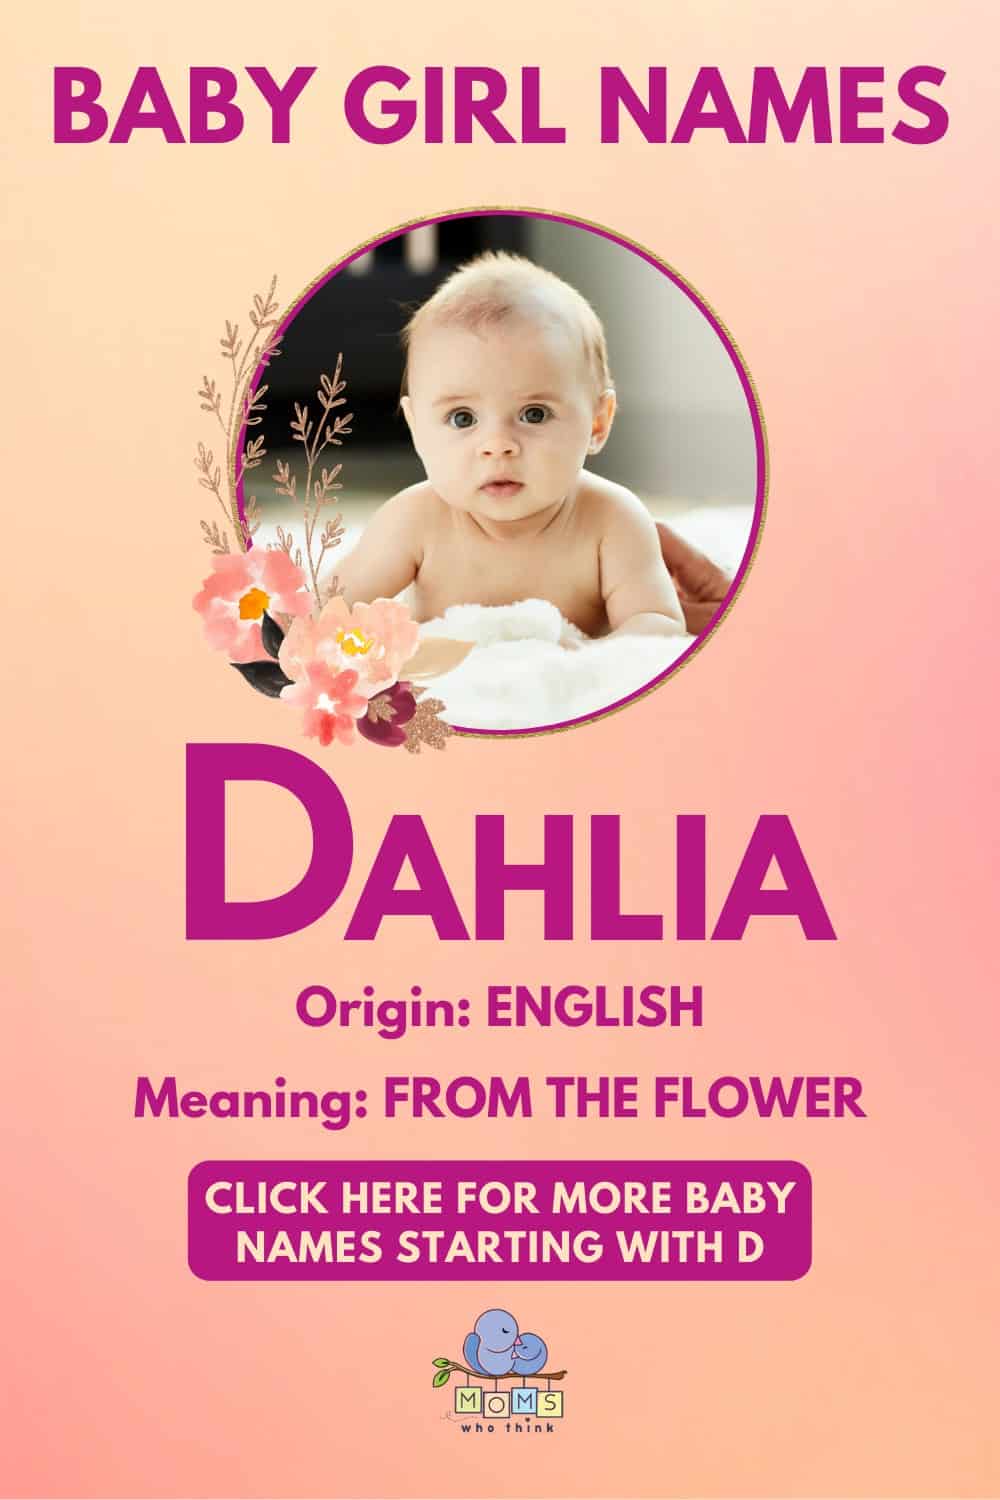 Baby girl name meanings - Dahlia